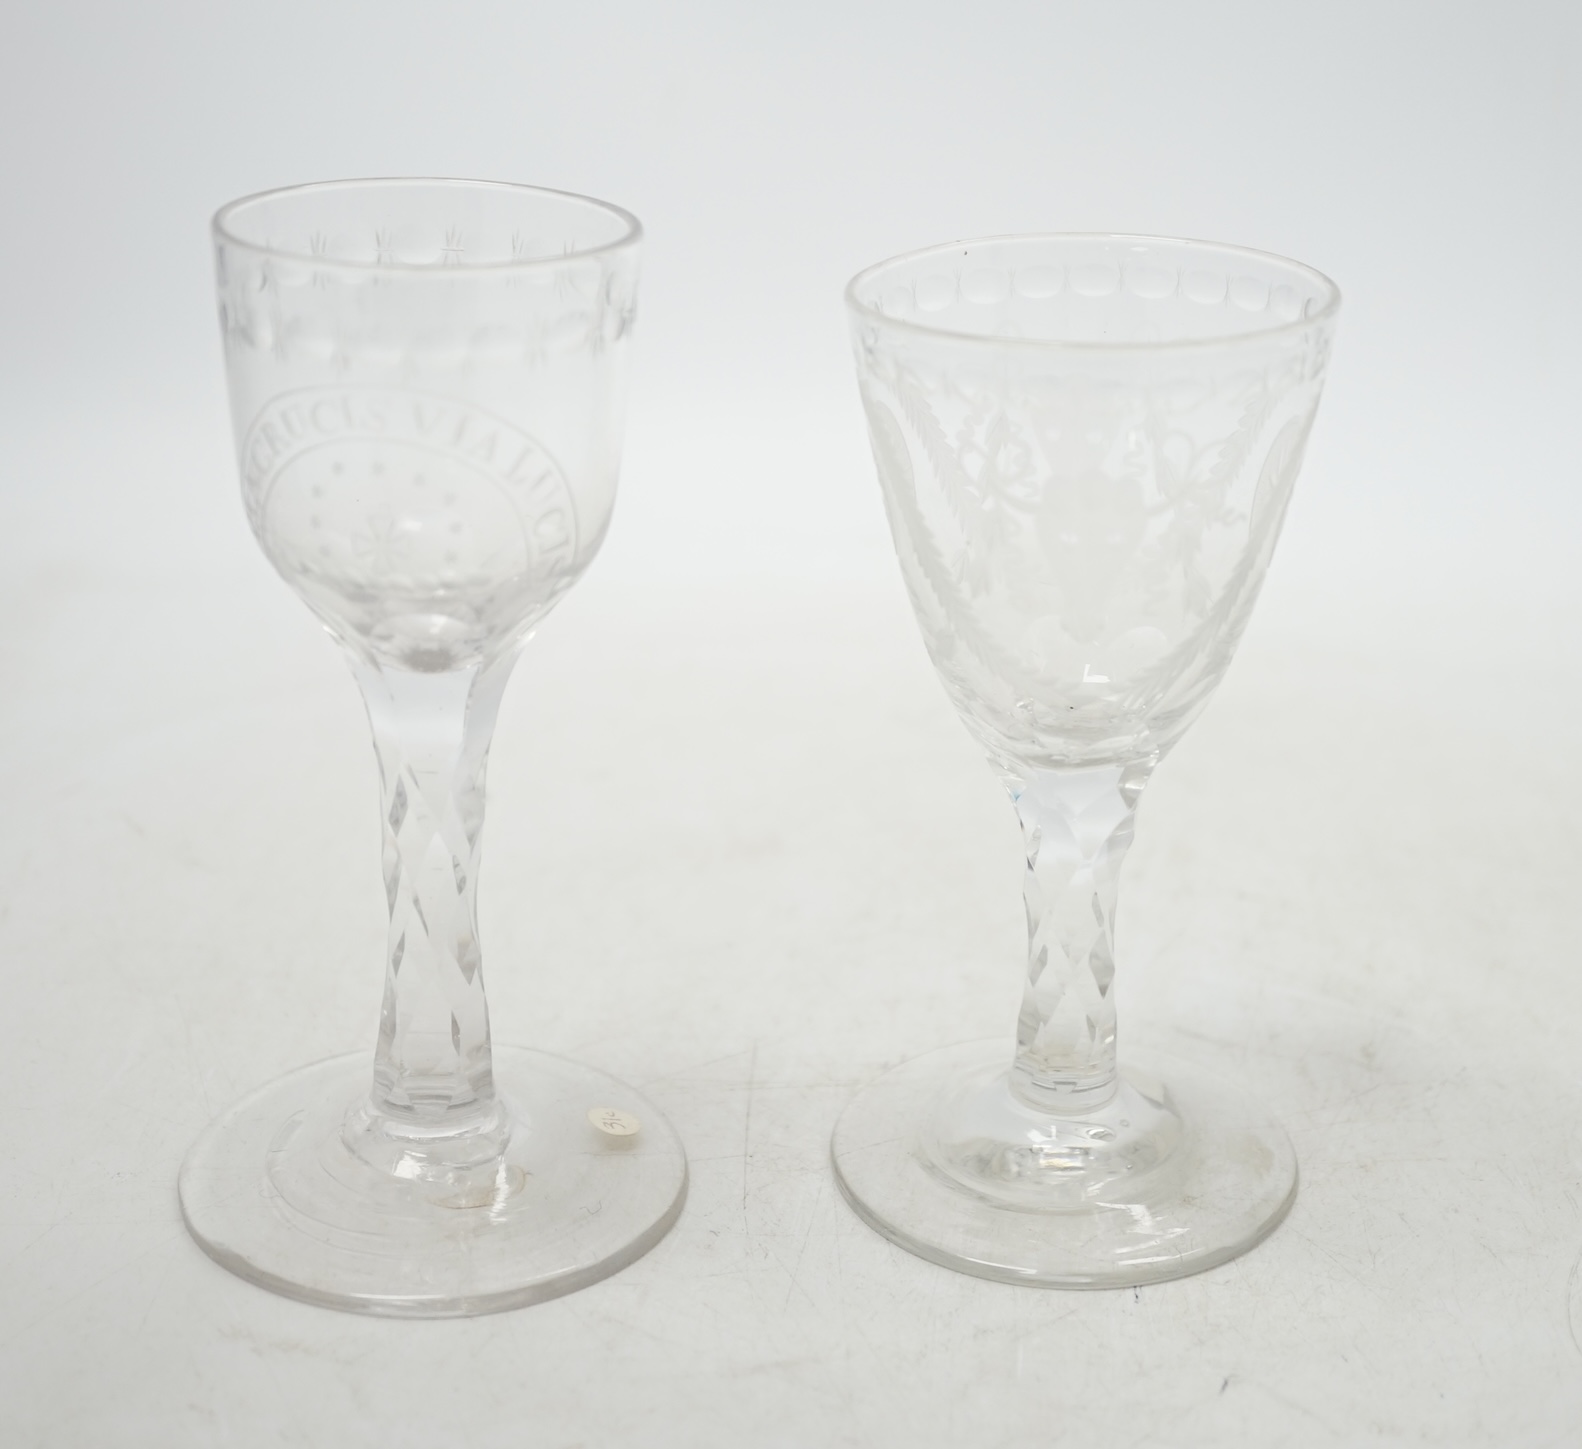 Two 18th century wine glasses with faceted stems, both with engraved bowls, one neo-classical and one reading ‘Via Crucis Via Lucis’, tallest 13.5cm. Condition - good